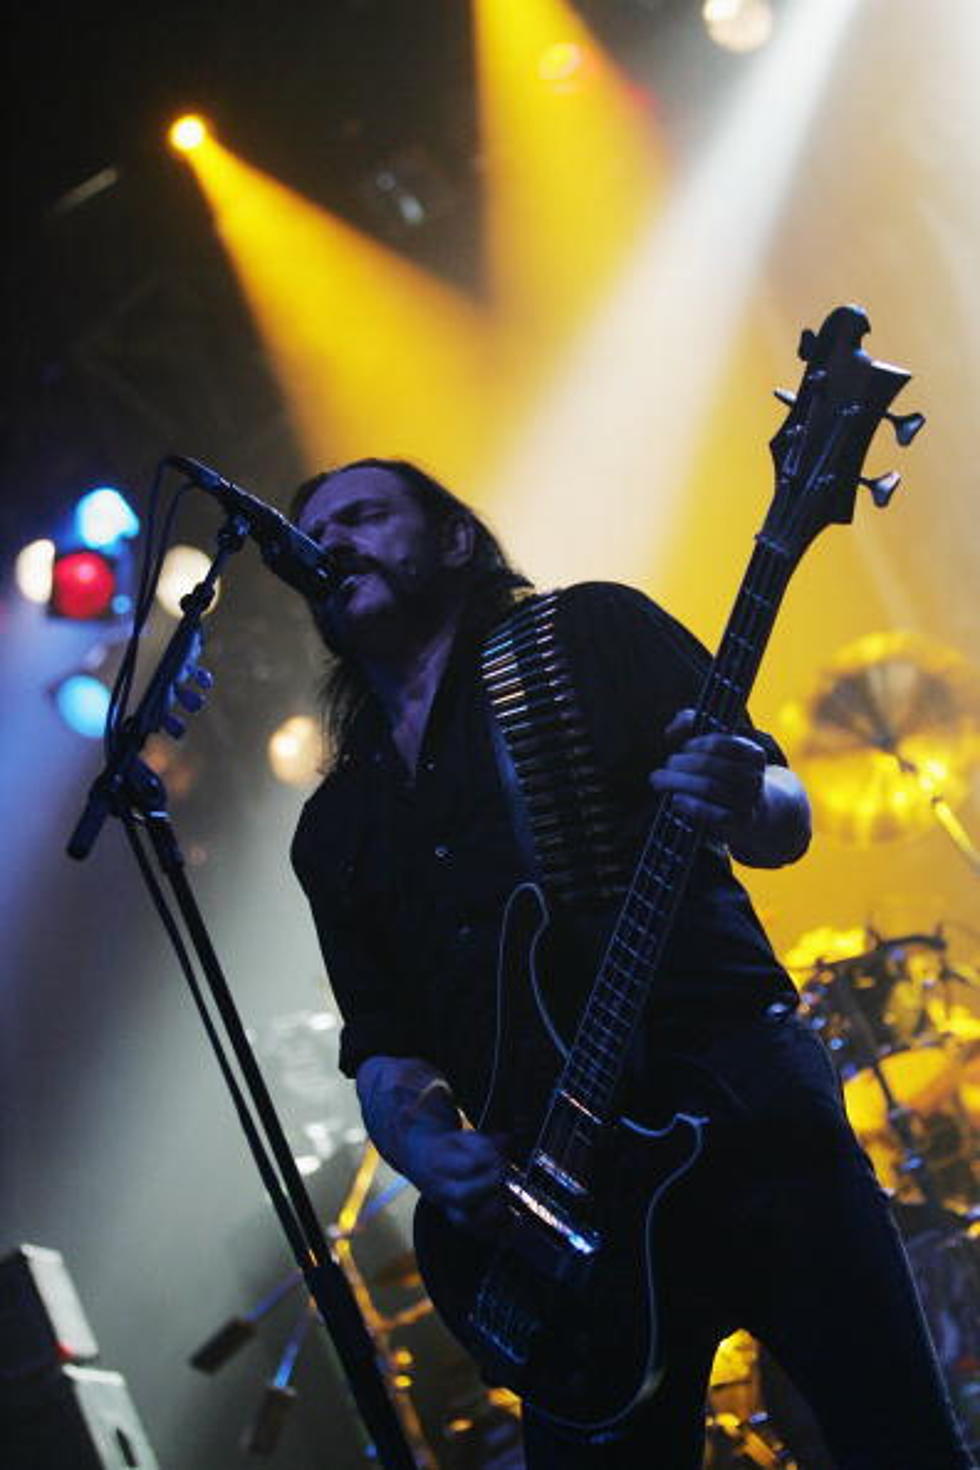 New From Rock In Rio, Motorhead Live!! [VIDEO]